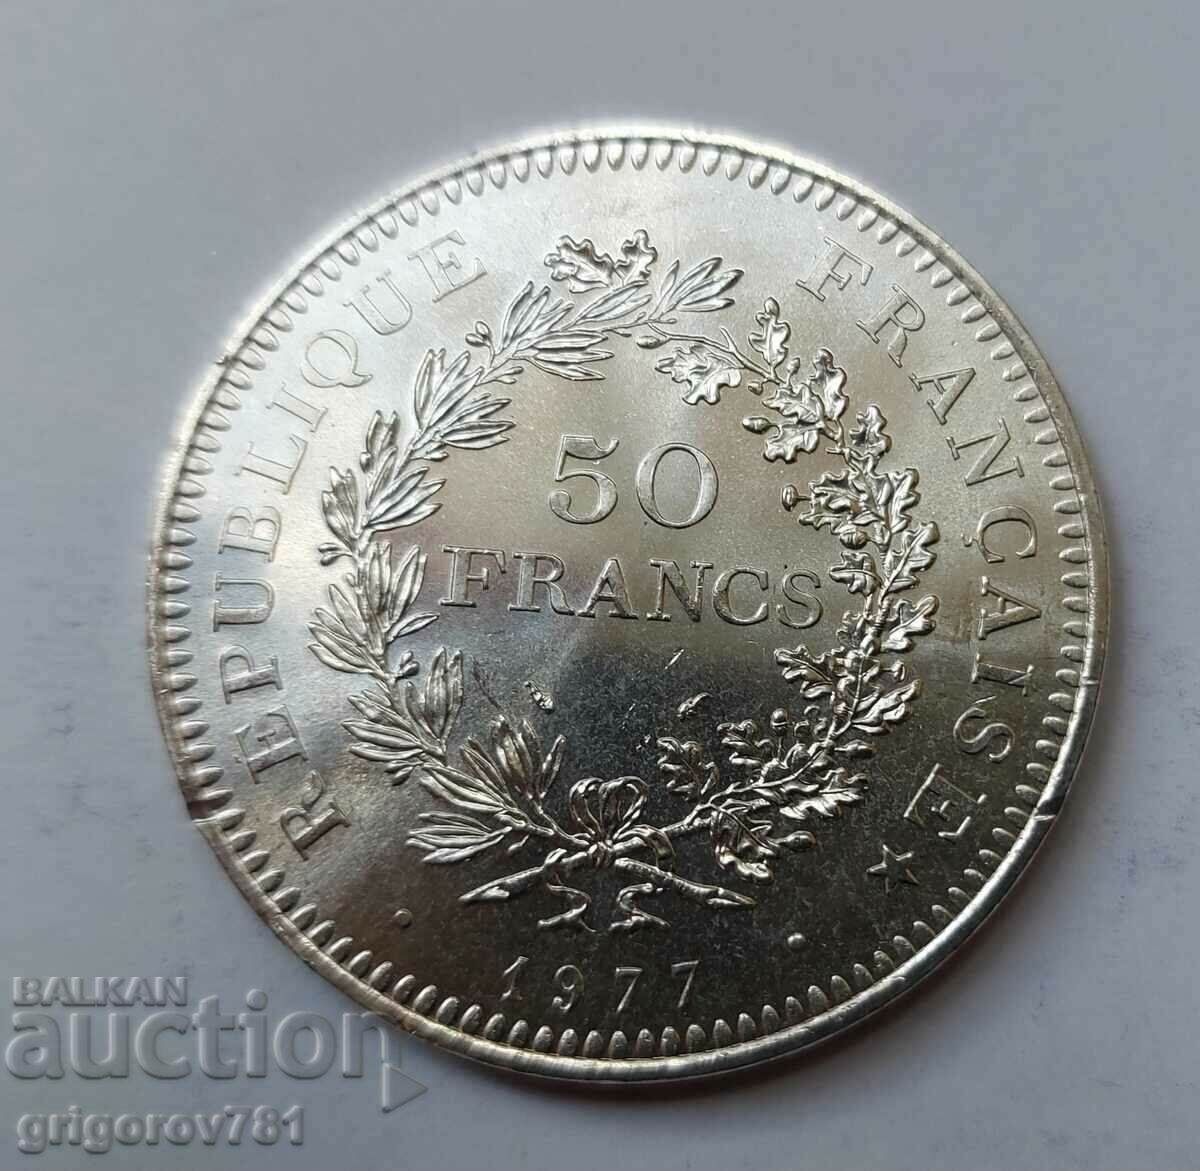 50 Francs Silver France 1977 - Silver Coin #48